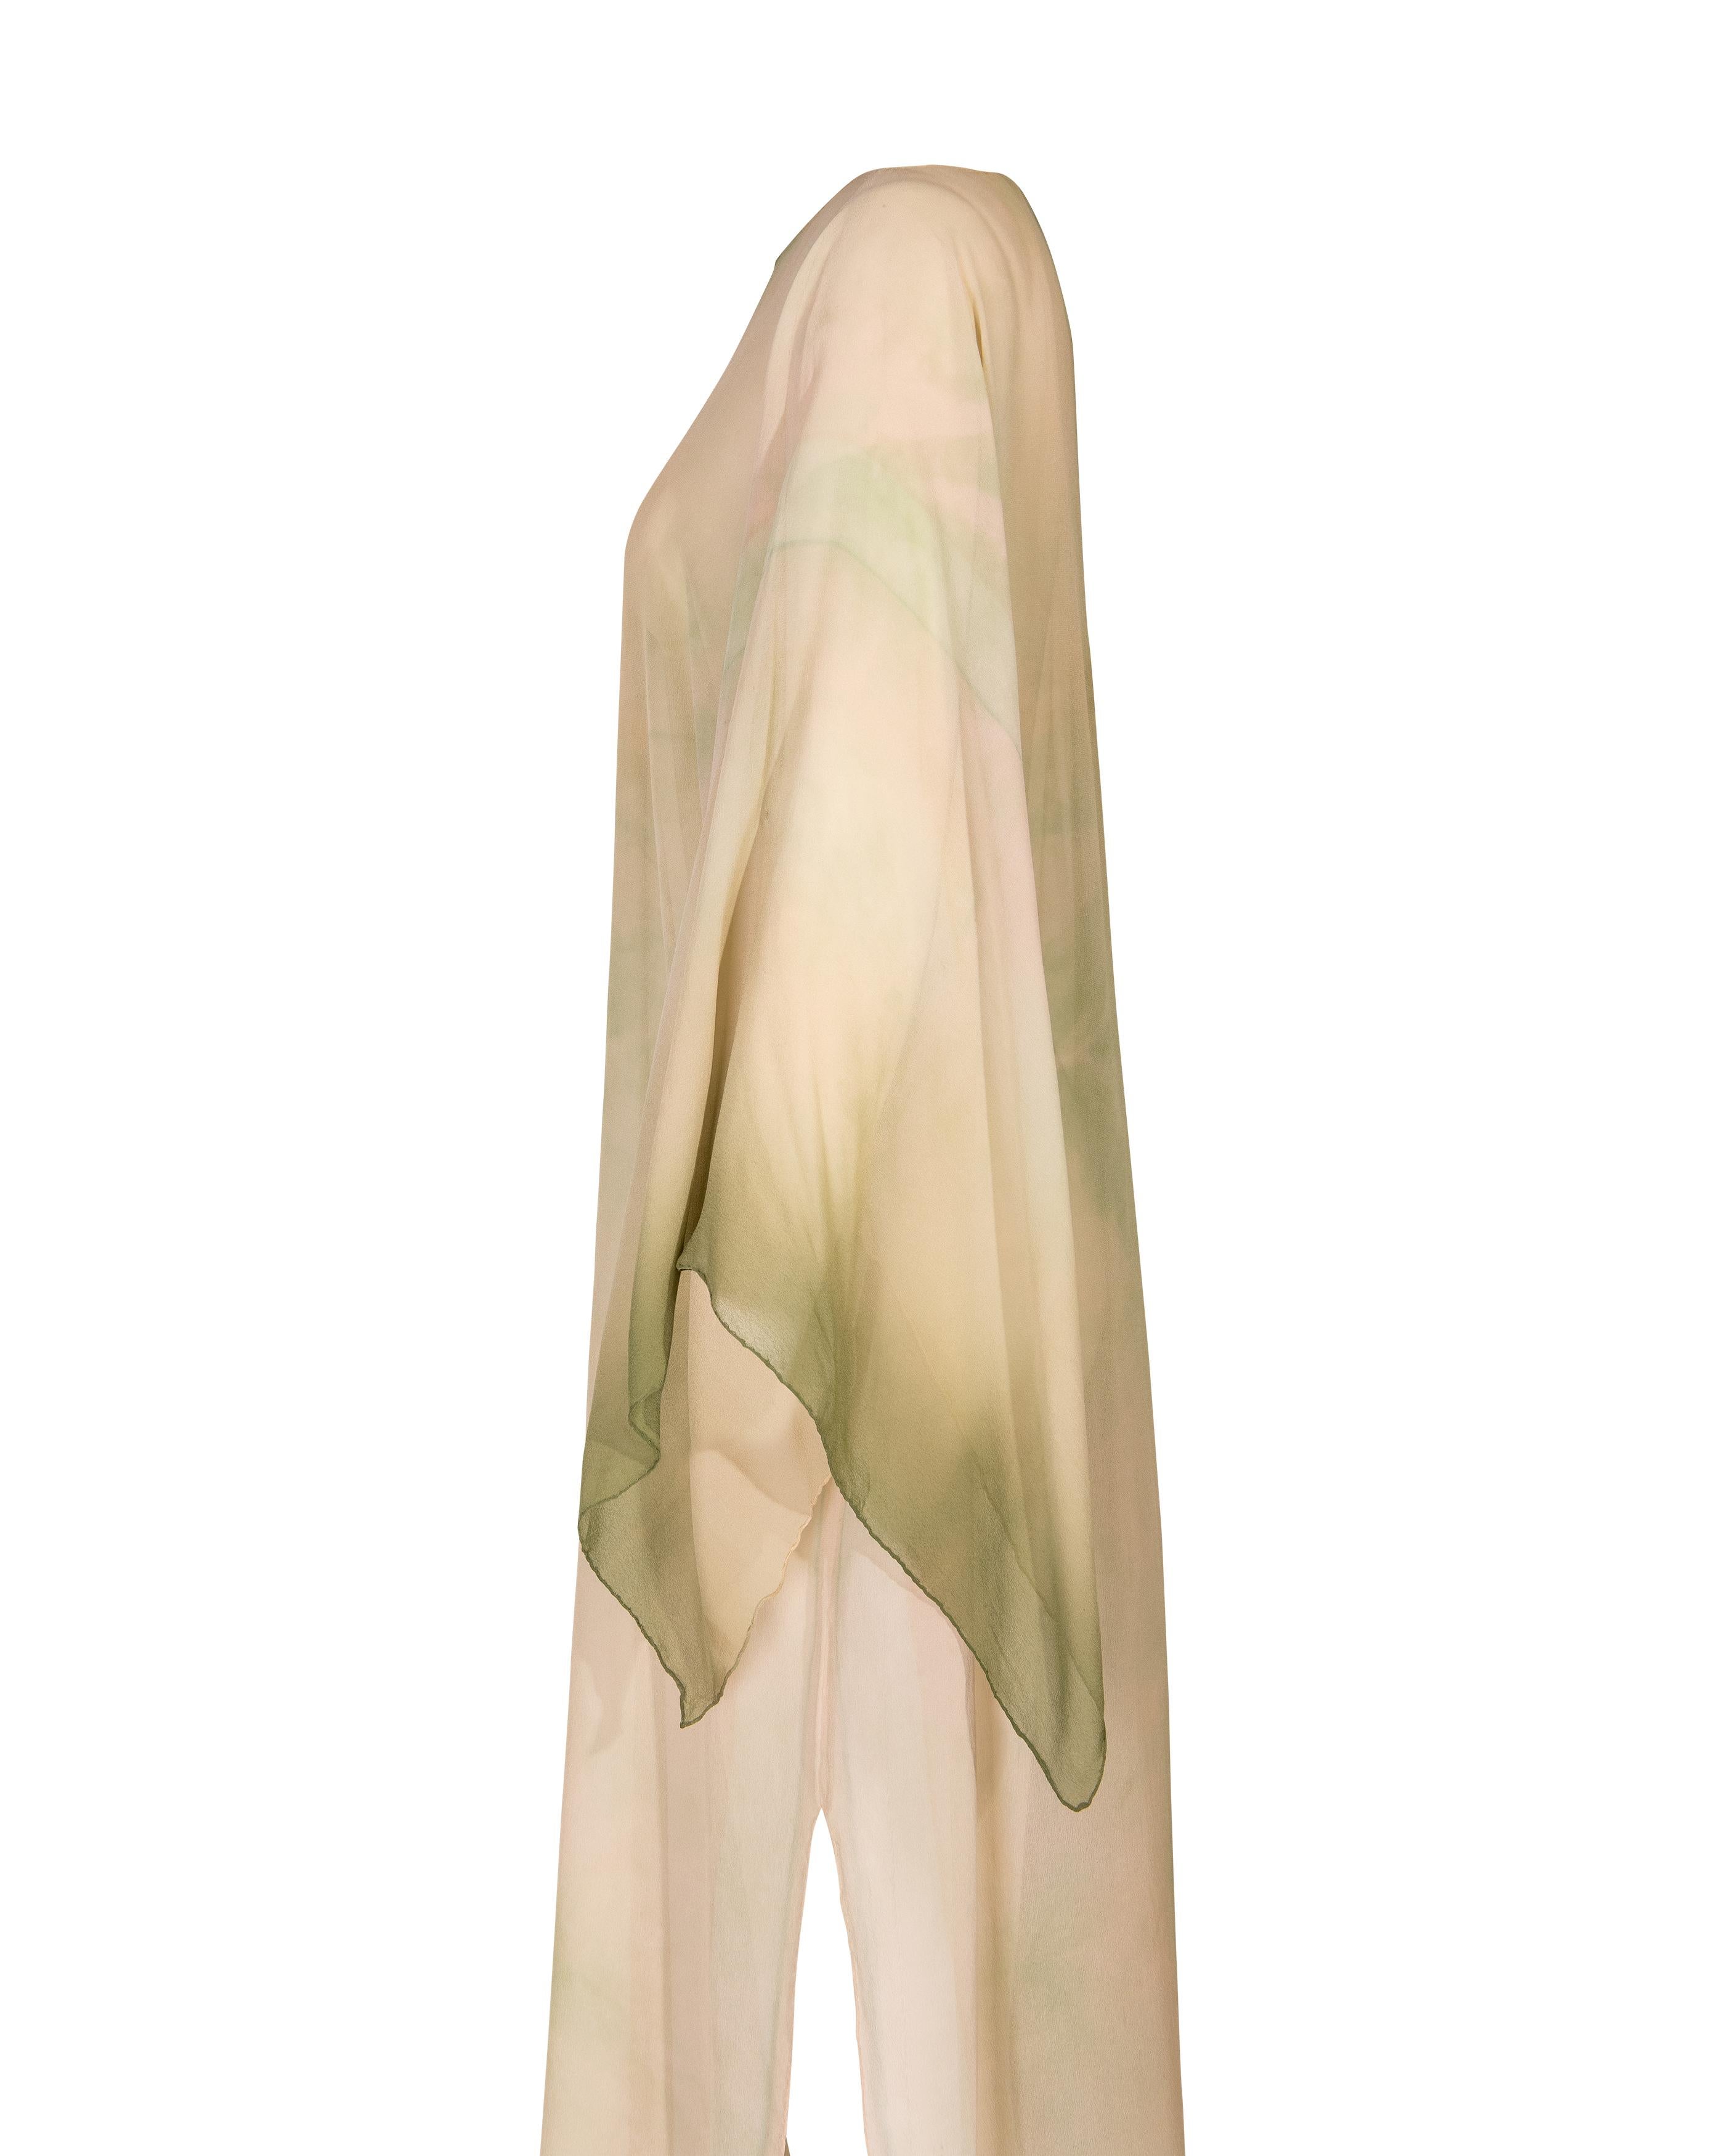 Women's 1970's Halston (Attributed) Olive Green and Peach Tie-Dye Caftan